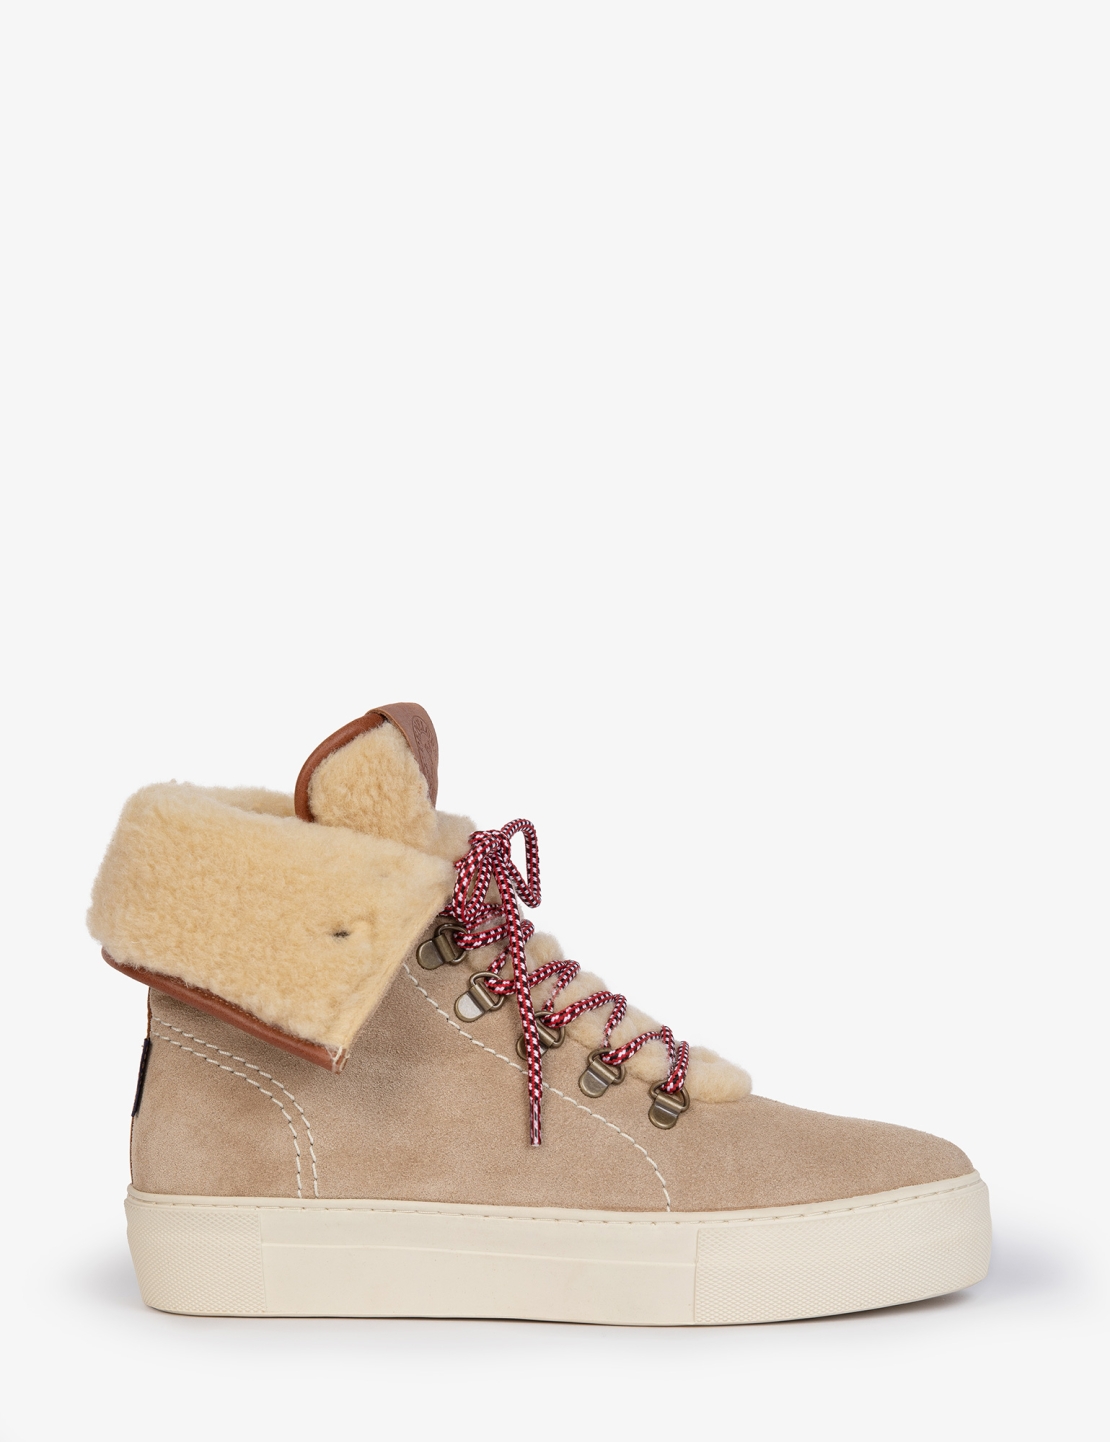 Phoenix Wool-Lined Suede Boot- Sand| Womens Boot |Penelope Chilvers